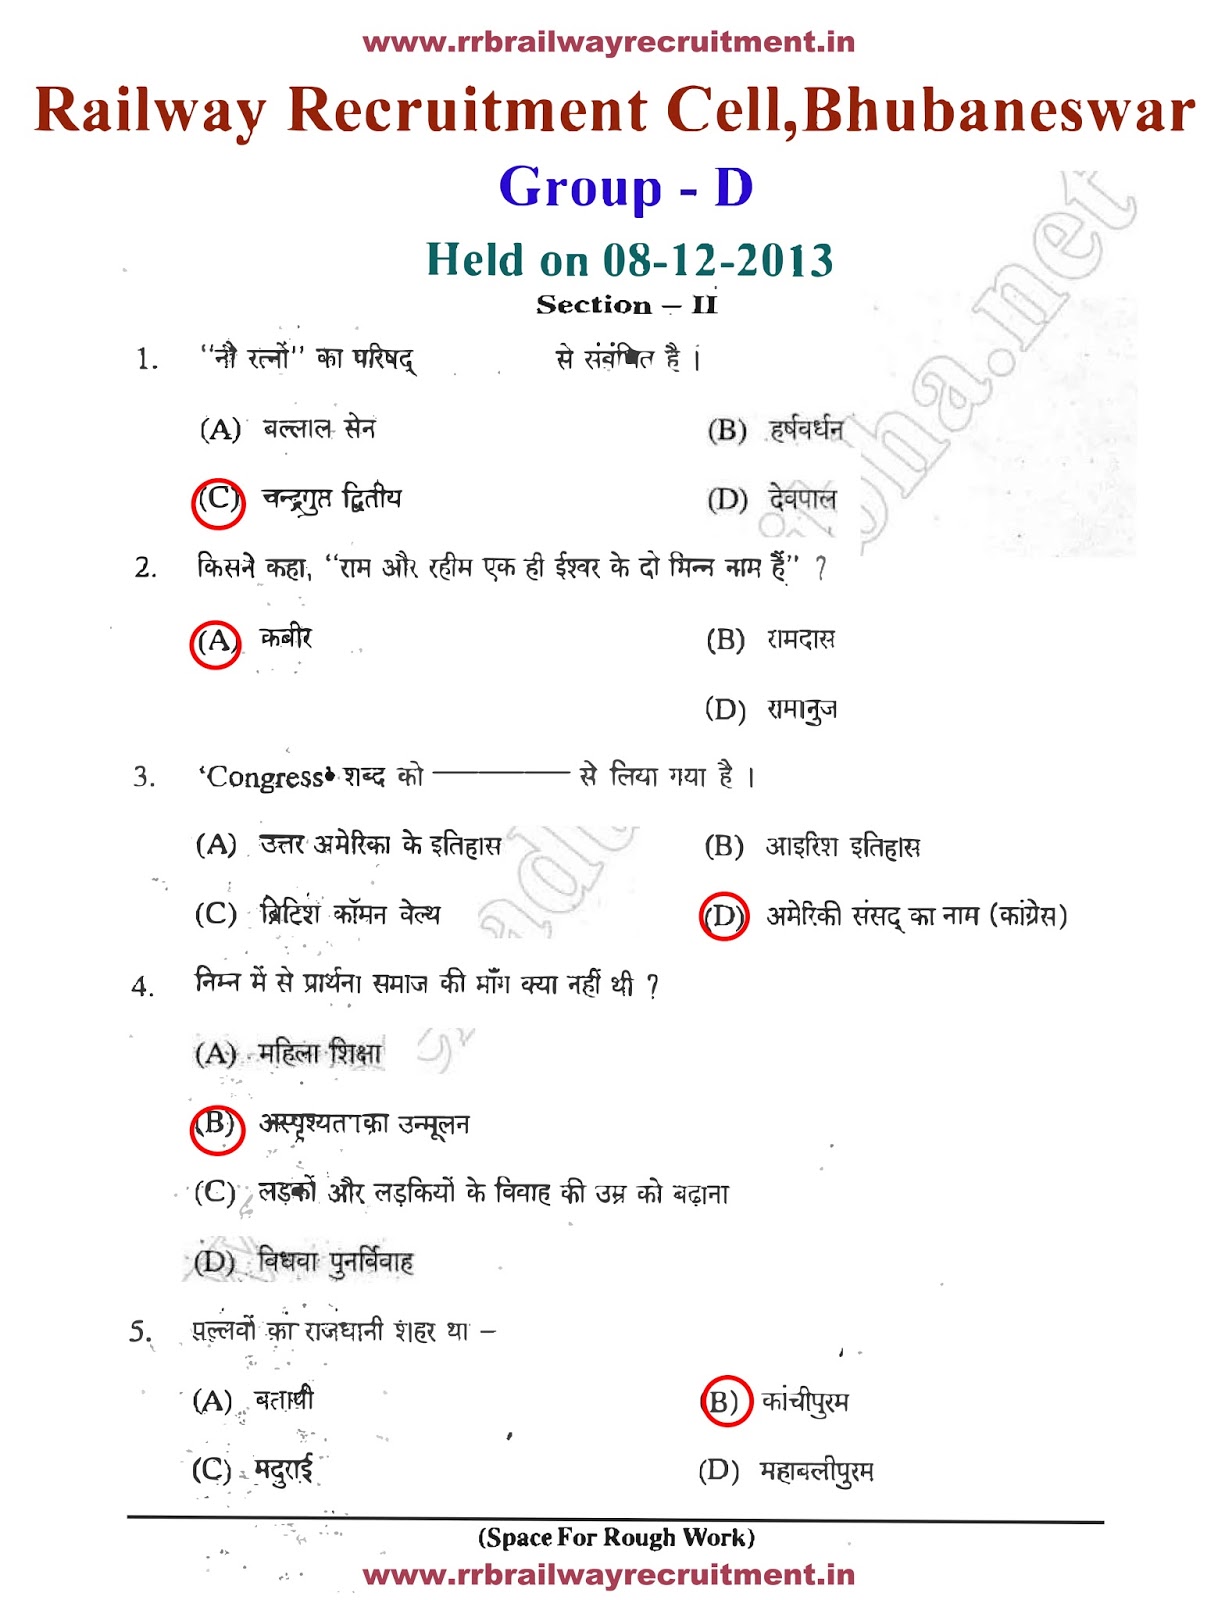 general science questions for railway exams in hindi